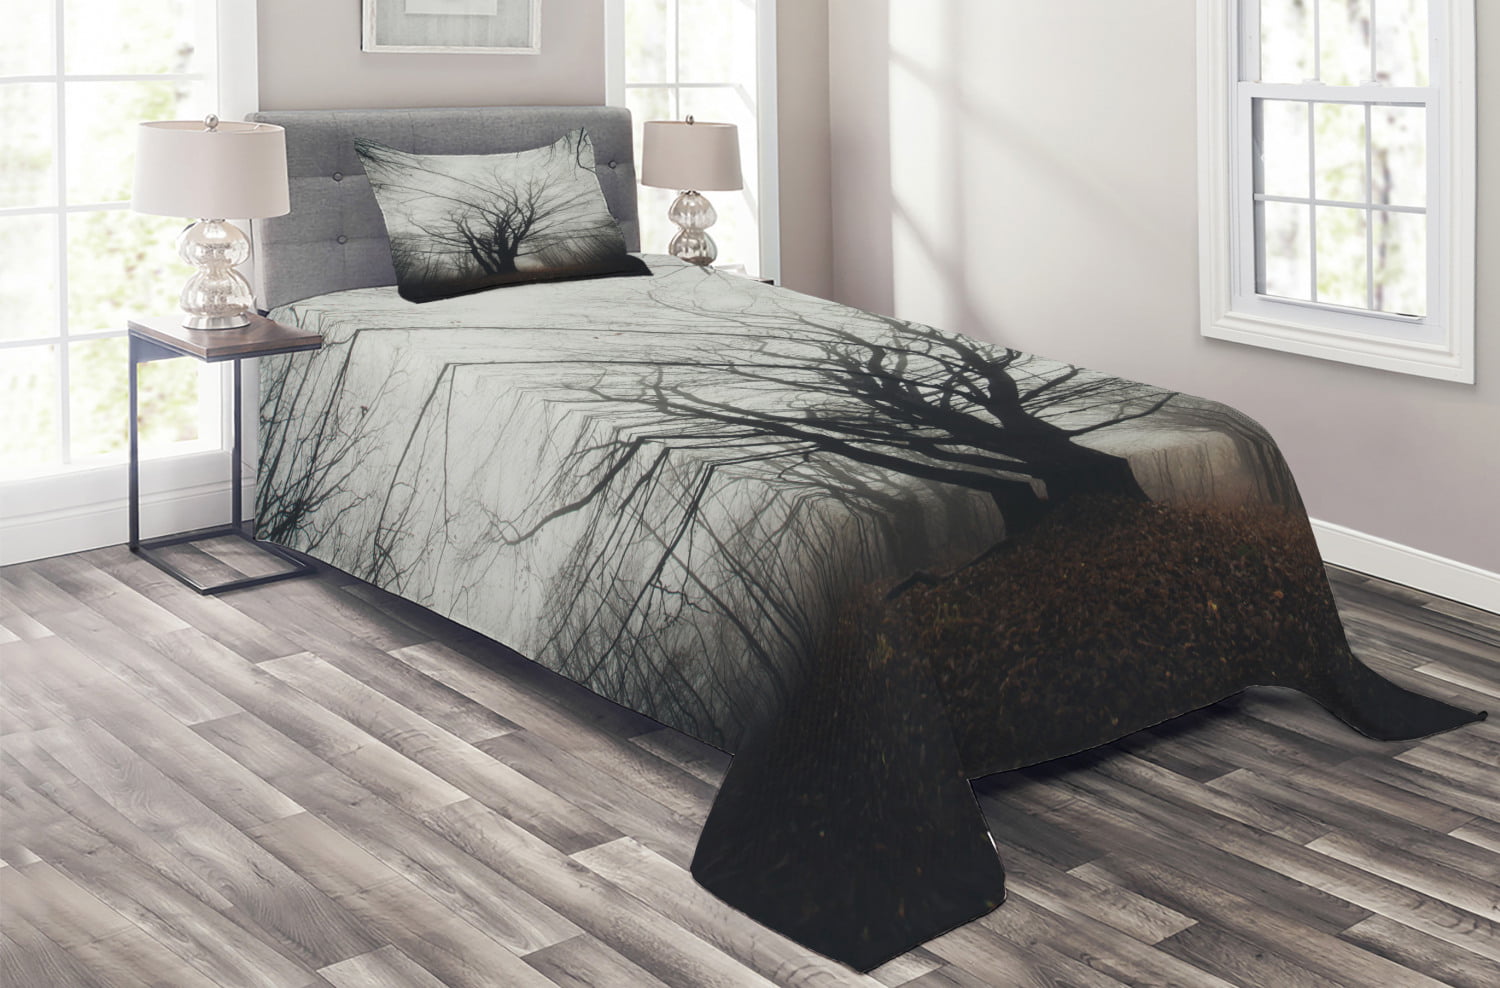 Mysterious Forest with Old Trees and Rocks Ultra-Soft Micro Fleece Blanket Home Decor Warm Anti-Pilling Flannel Throw Blanket for Couch Bed Sofa